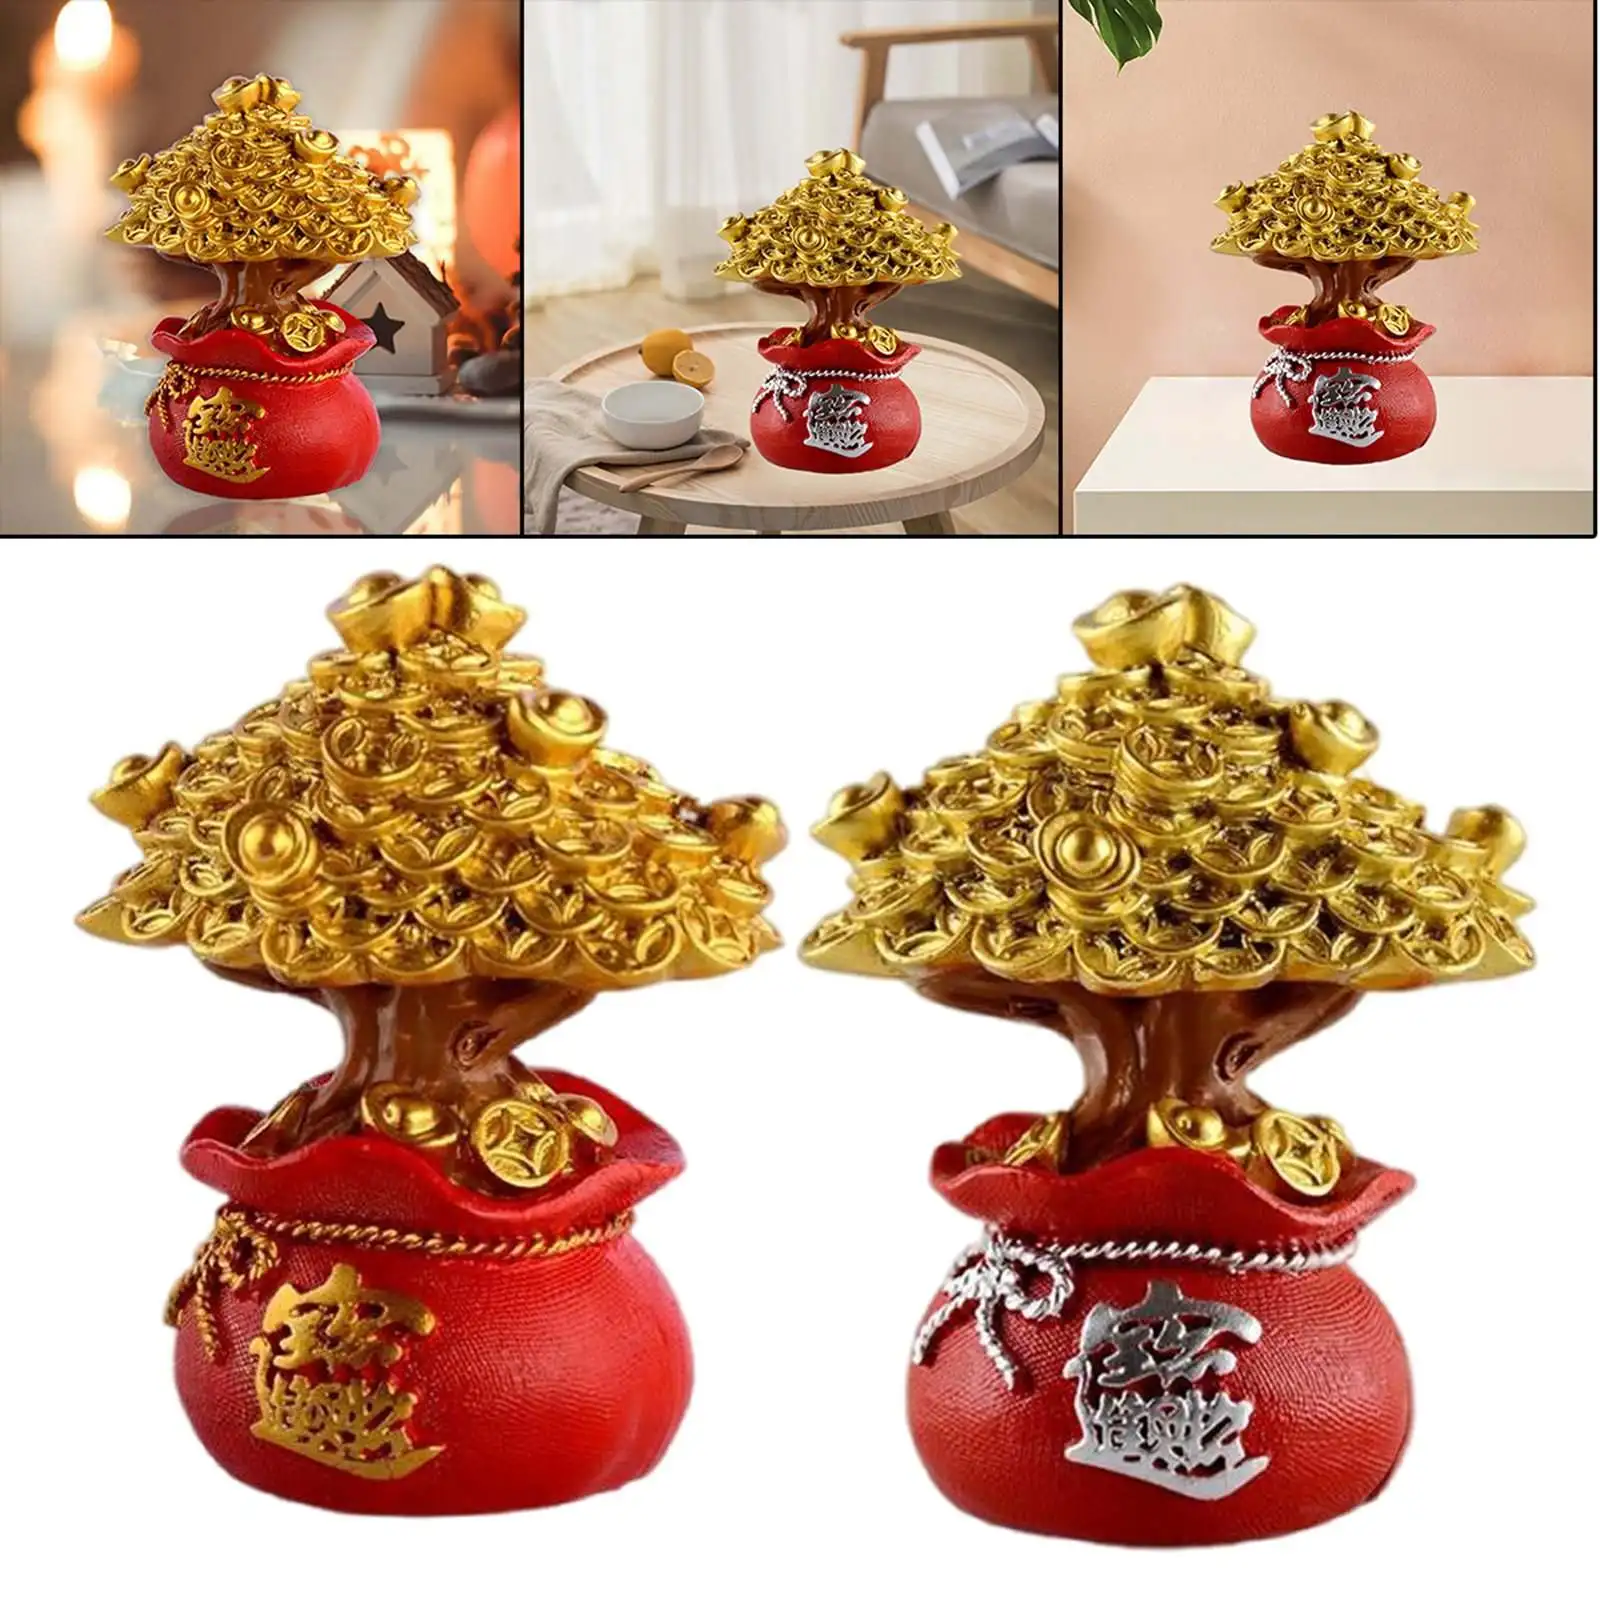 2x Money Tree Feng Shui Ornaments Table Top Lucky Tree Home Decor Gifts